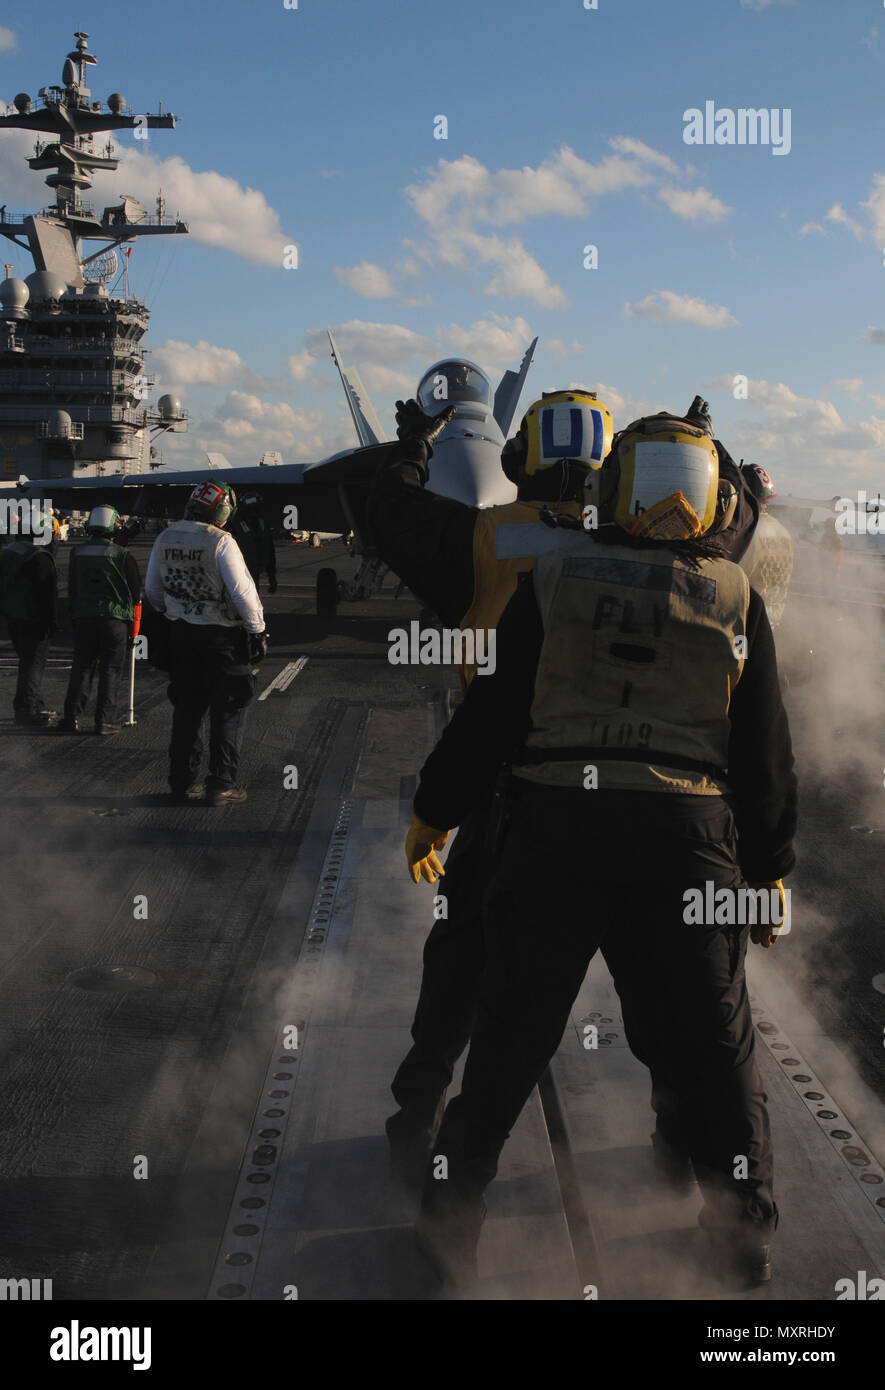 161202-N-JU894-166 ATLANTIC OCEAN (Dec. 2, 2016) Sailors direct an F/A-18E Super Hornet towards the catapult for take off on the flight deck aboard the aircraft carrier USS George H.W. Bush (CVN 77). GHWB is underway conducting a Composite Training Unit Exercise (COMPTUEX) with the George H.W. Bush Carrier Strike Group in preparation for an upcoming deployment. (U.S. Navy photo by Seaman Brooke Macchietto/Released) Stock Photo